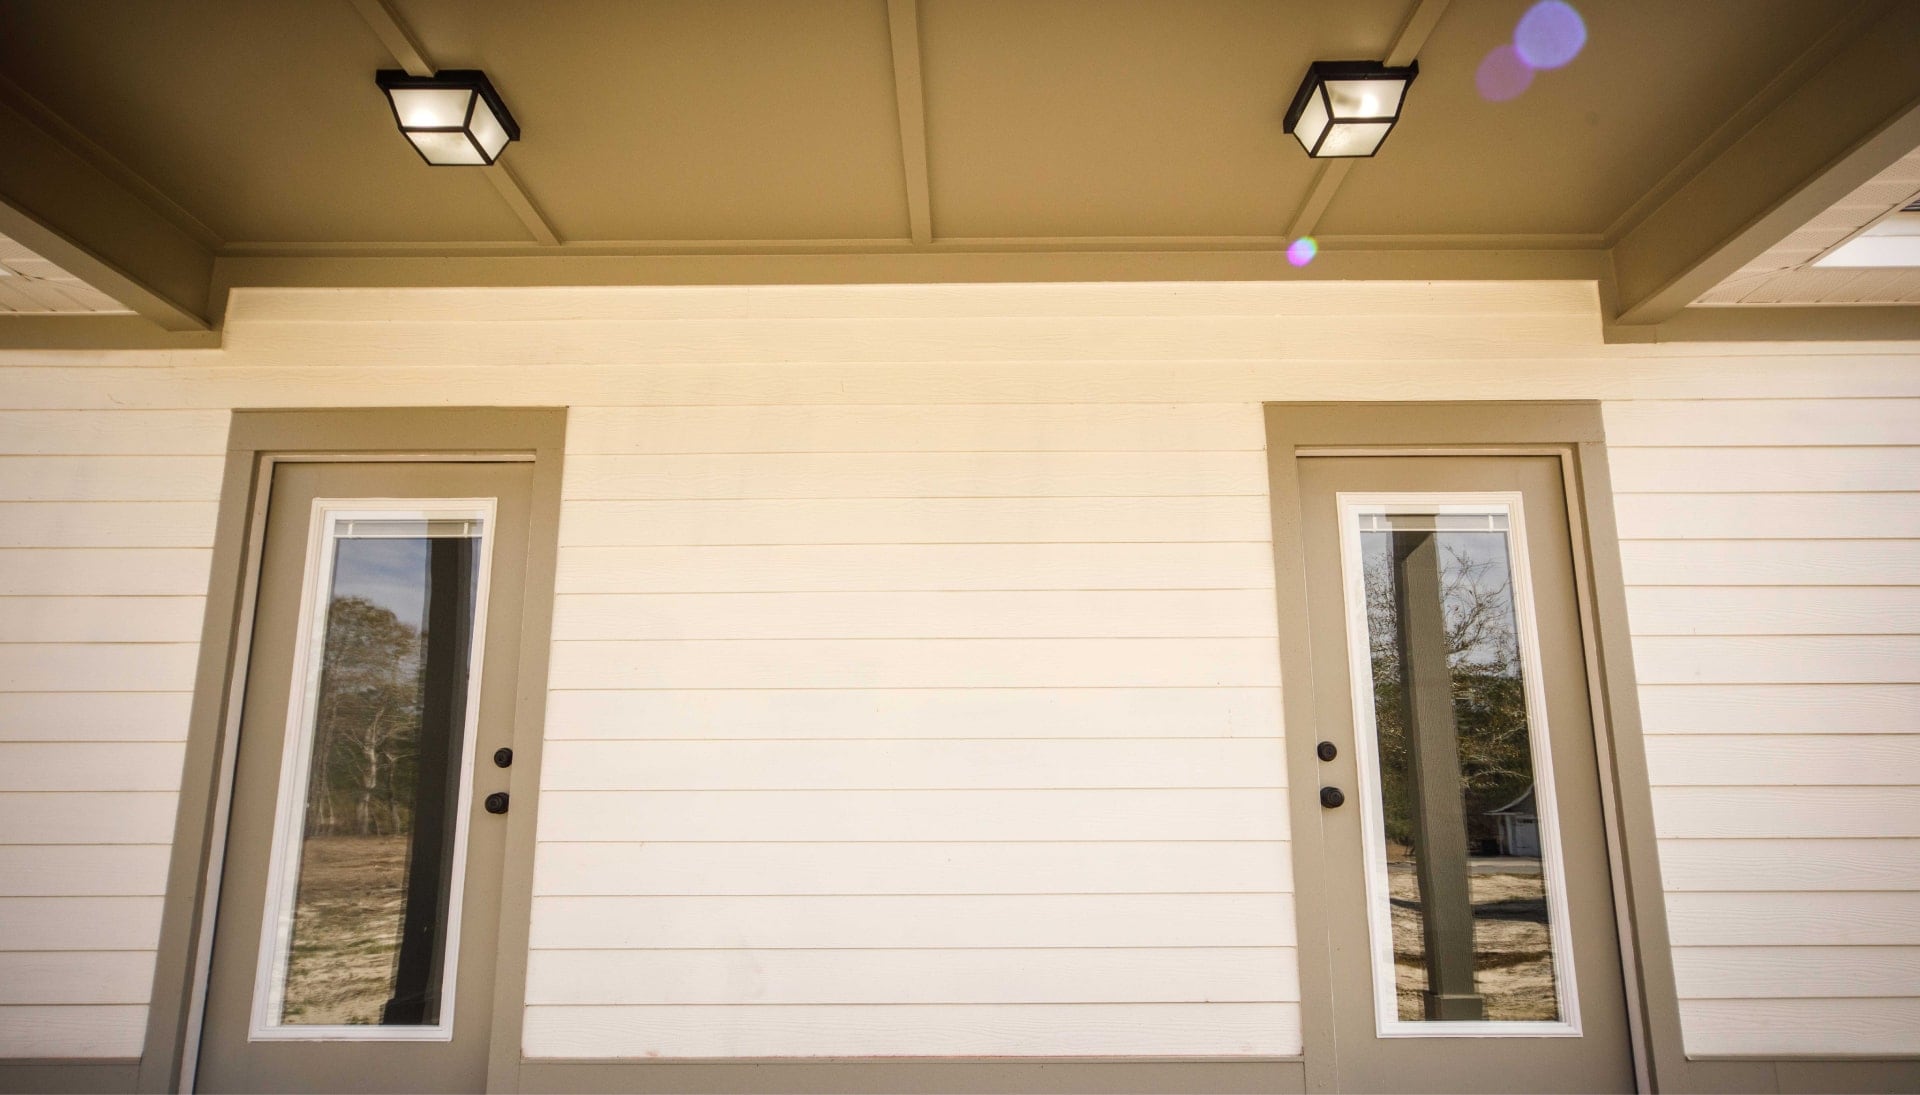 We offer siding services in Orange County, California. Hardie plank siding installation in a front entry way.